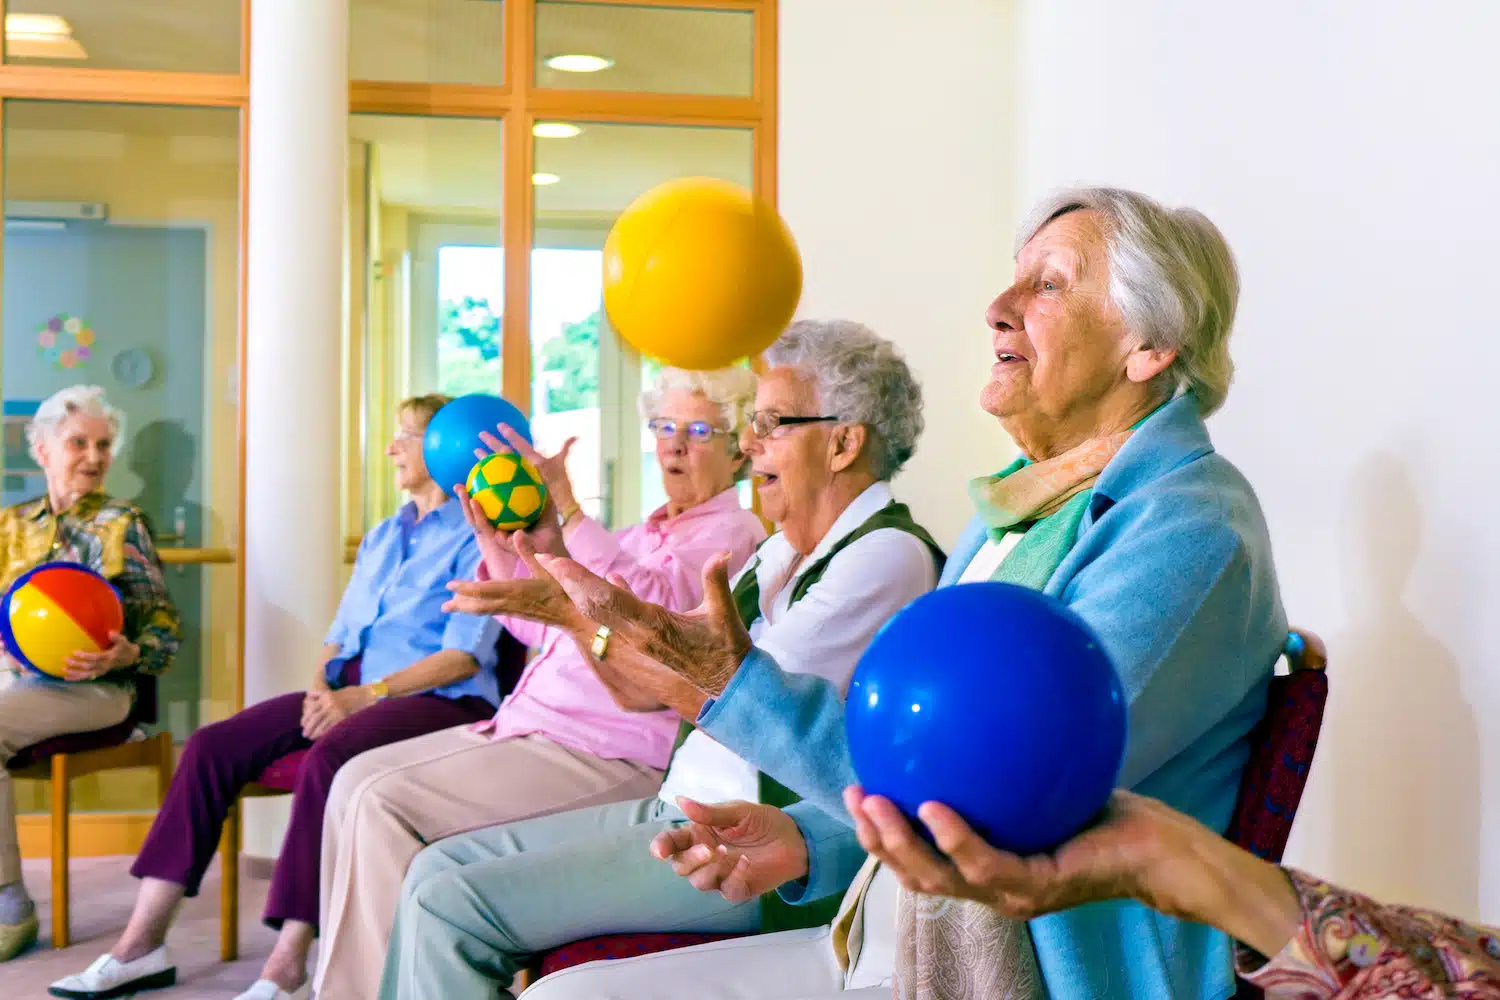 activities in assisted living community with colorful agility ball throws